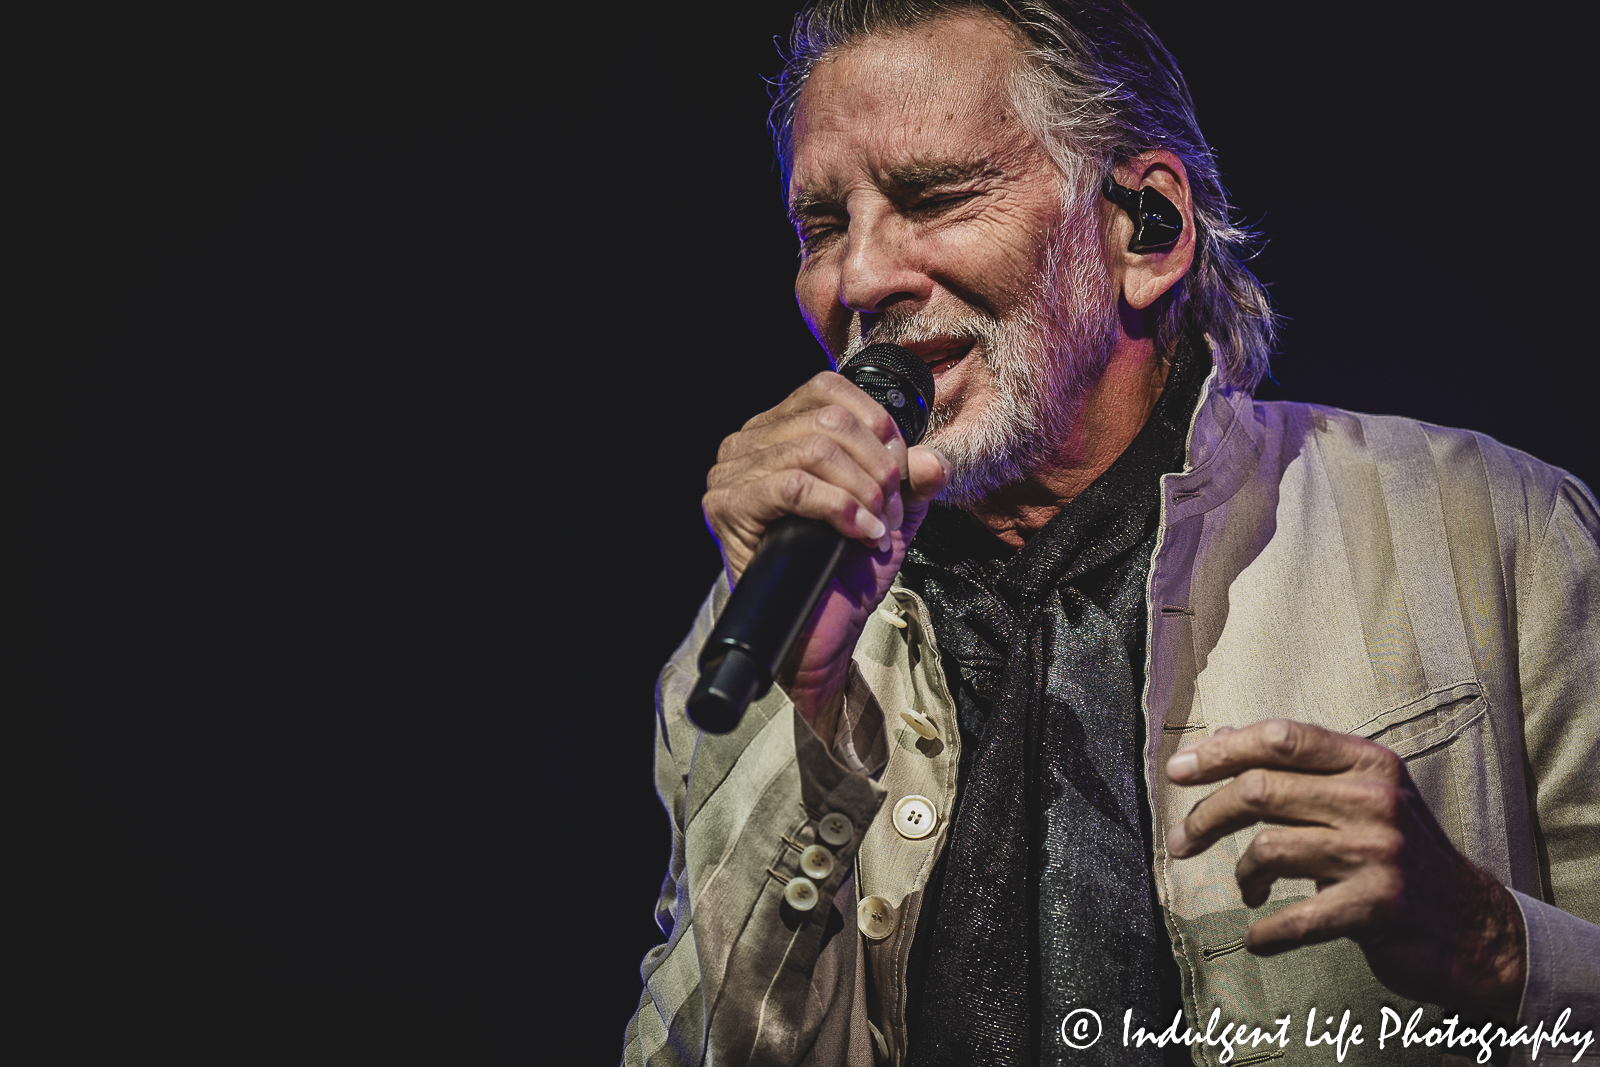 Kenny Loggins singing "Heart to Heart" live in concert at The Family Arena in St. Charles, MO during his "This Is It!" farewell tour stop on August 17, 2023.